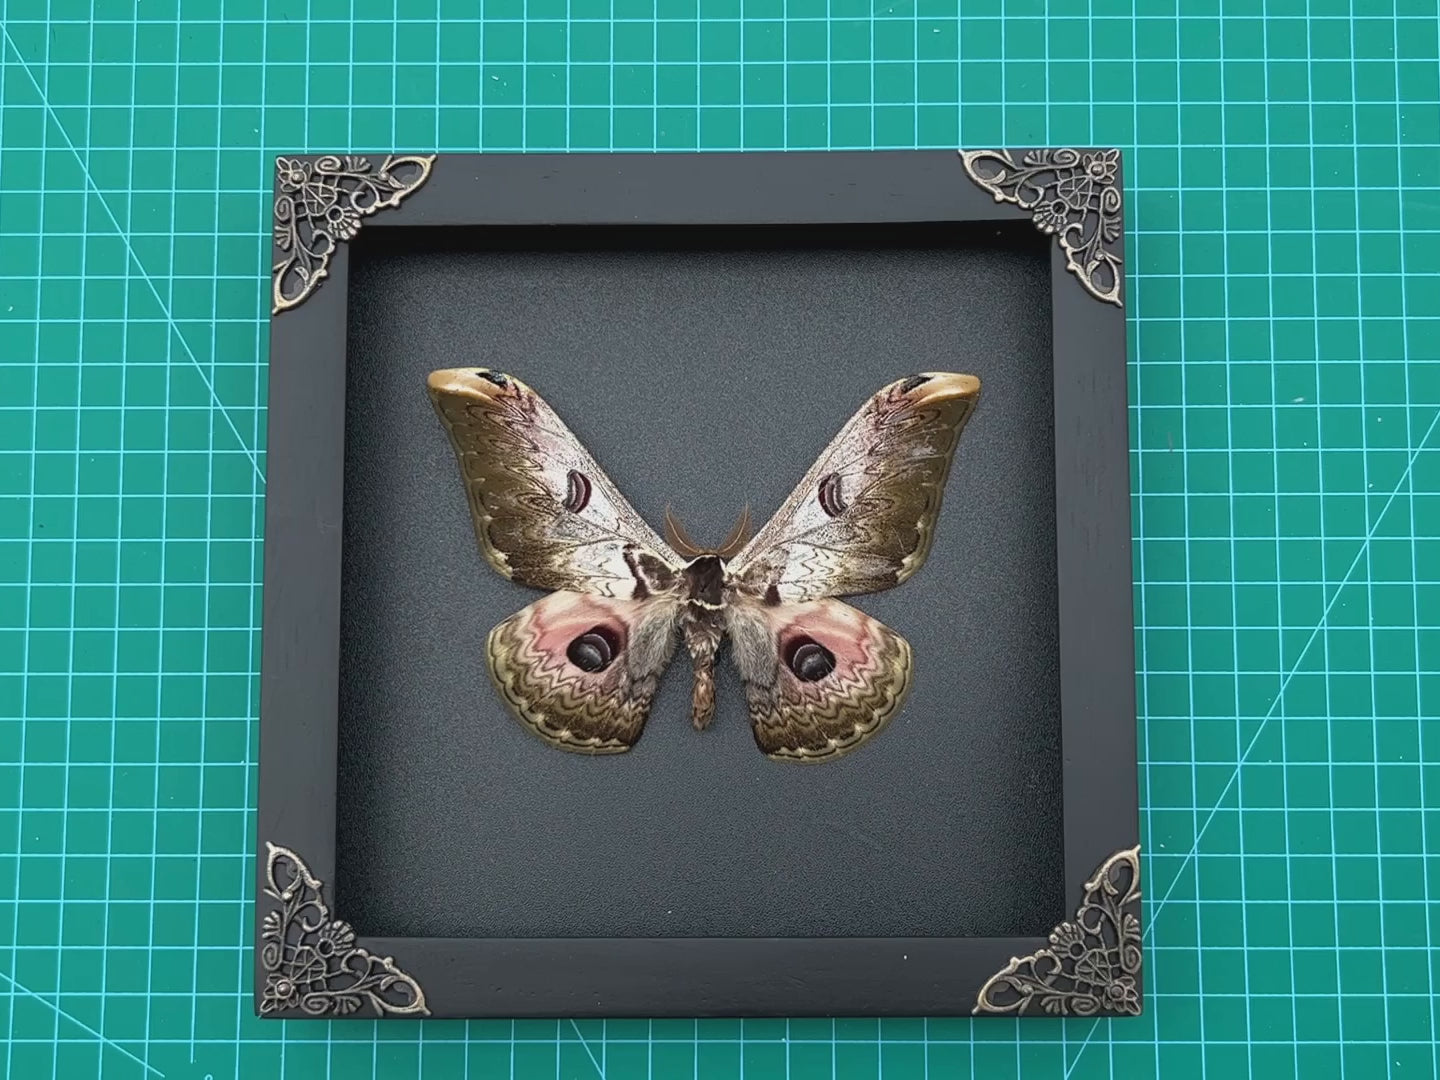 Real Framed Butterfly Black Wooden Shadow Box Dried Saturniidae Insect Lover Taxidermy Dead Bug Taxadermy Specimen Display Wall Art Hanging Decoration